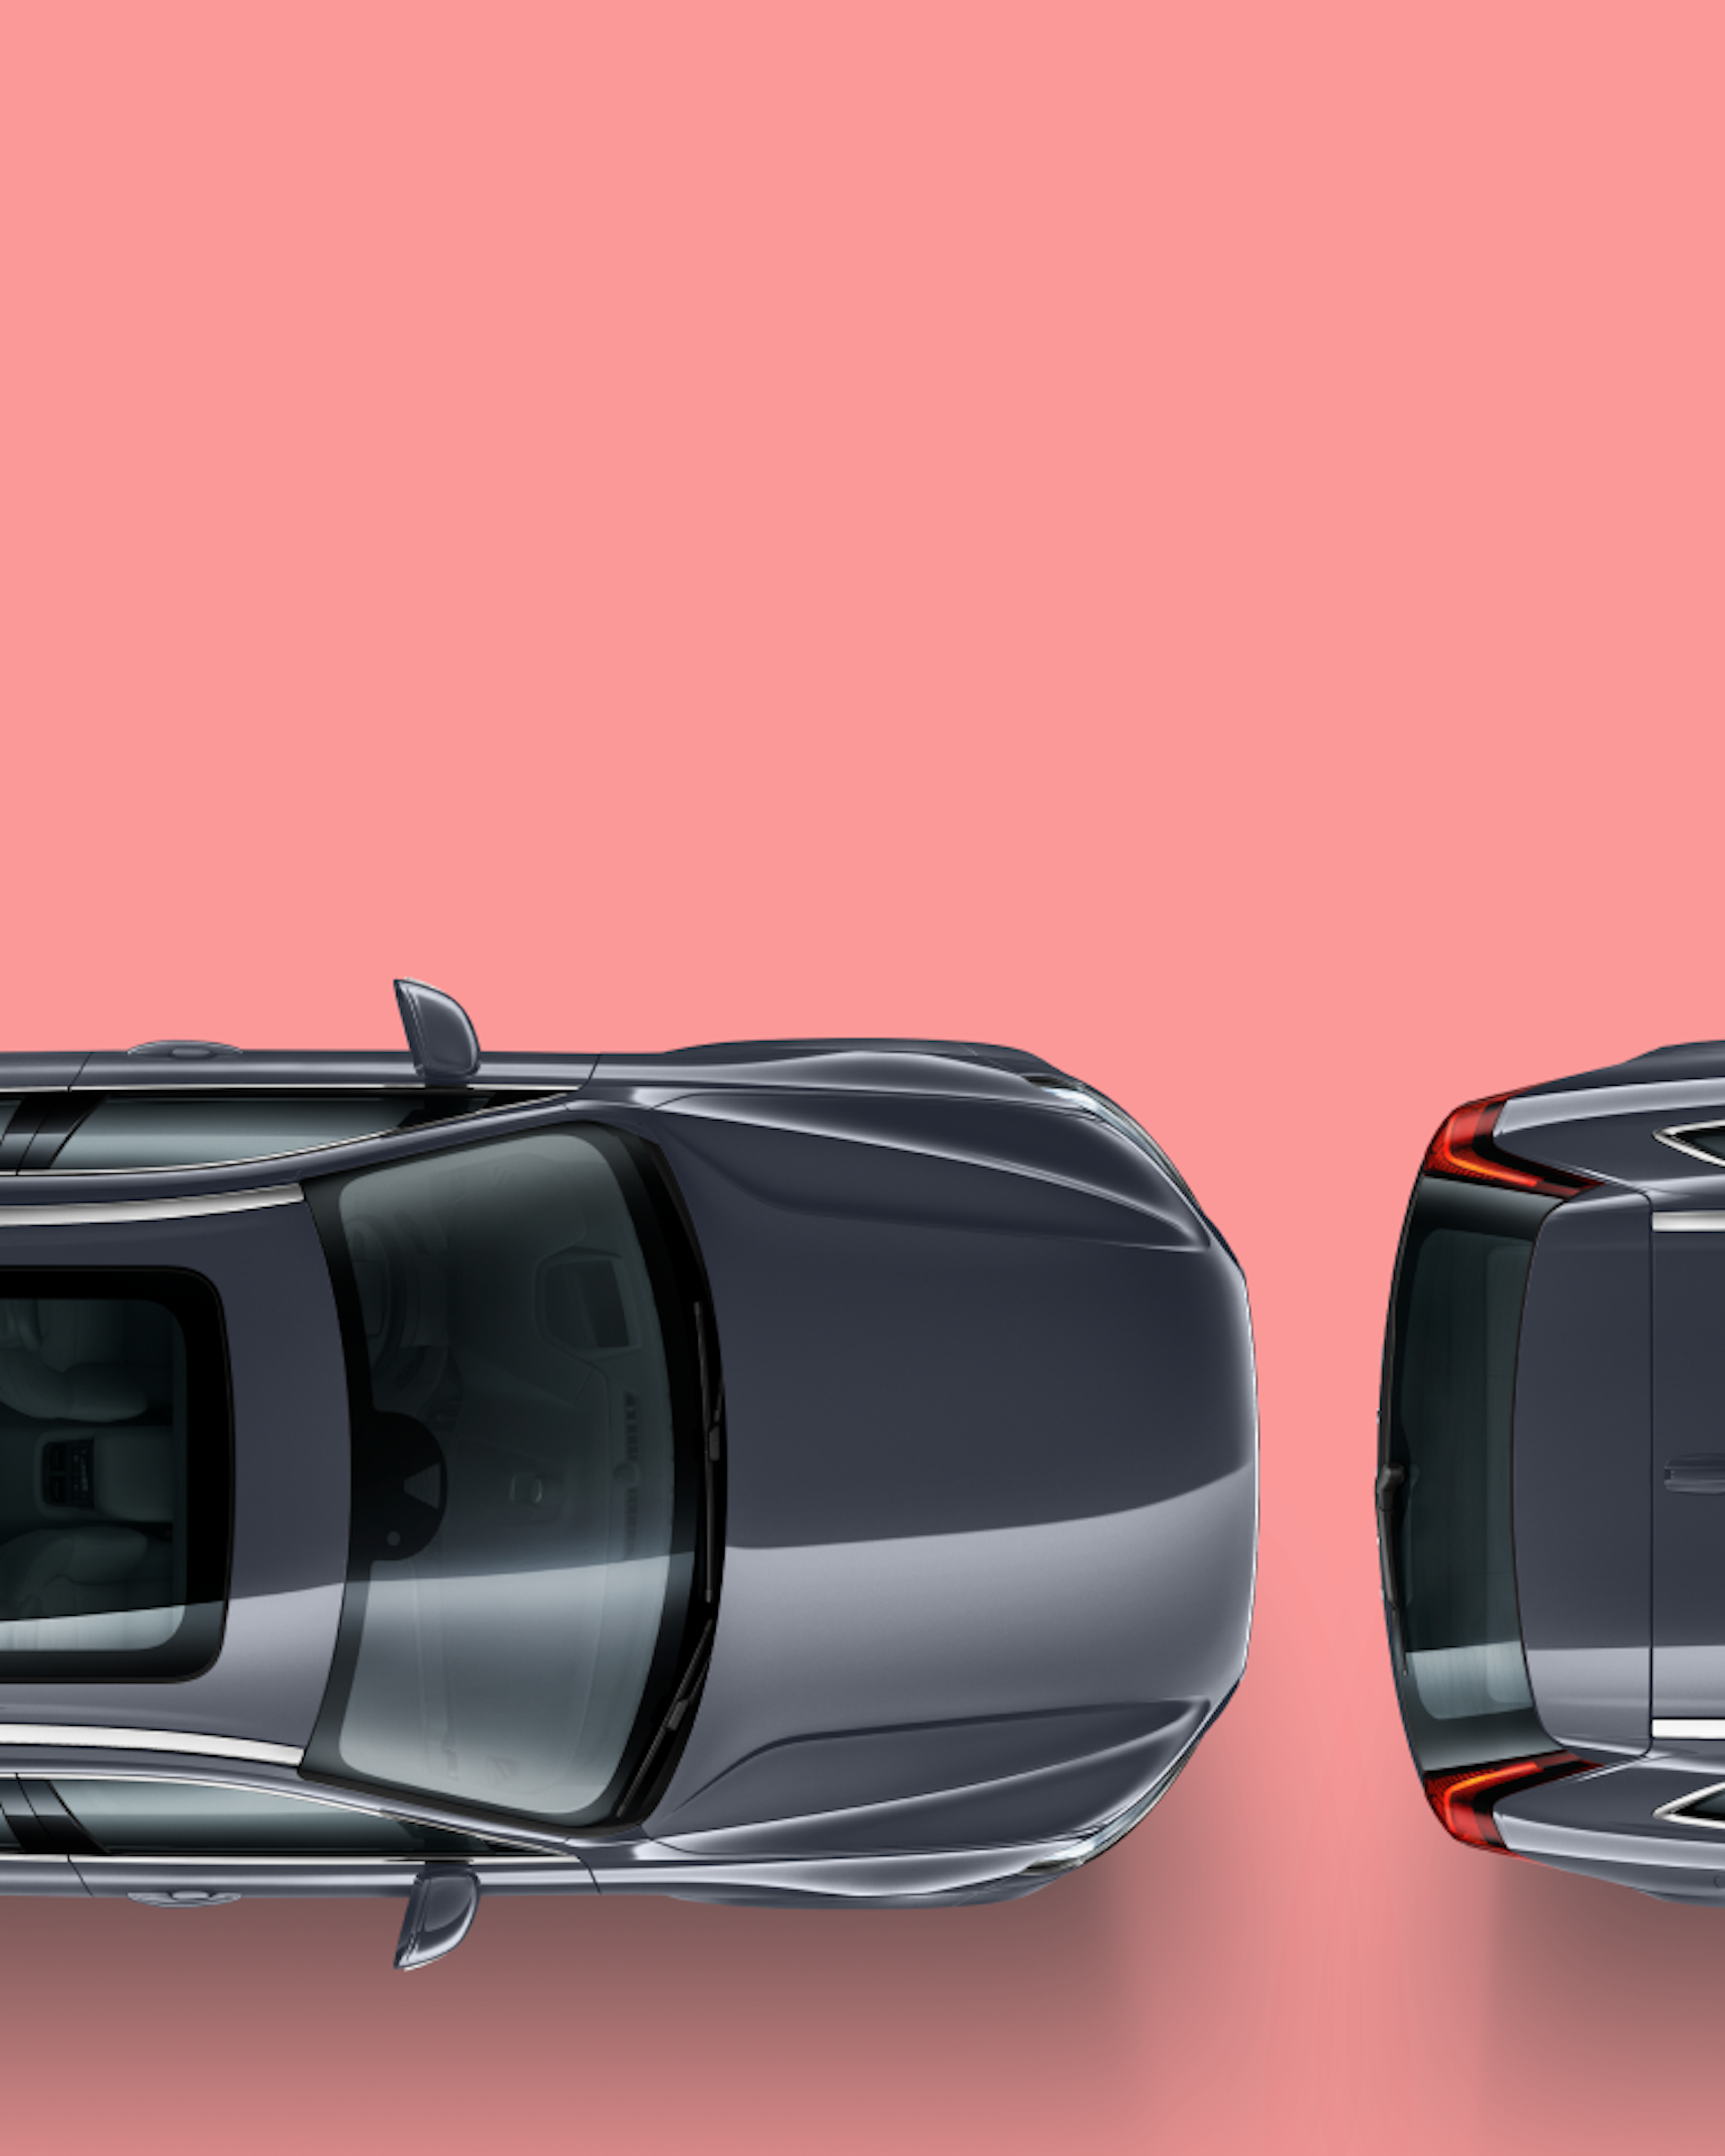 Top view of the front and rear parts of two Volvo cars